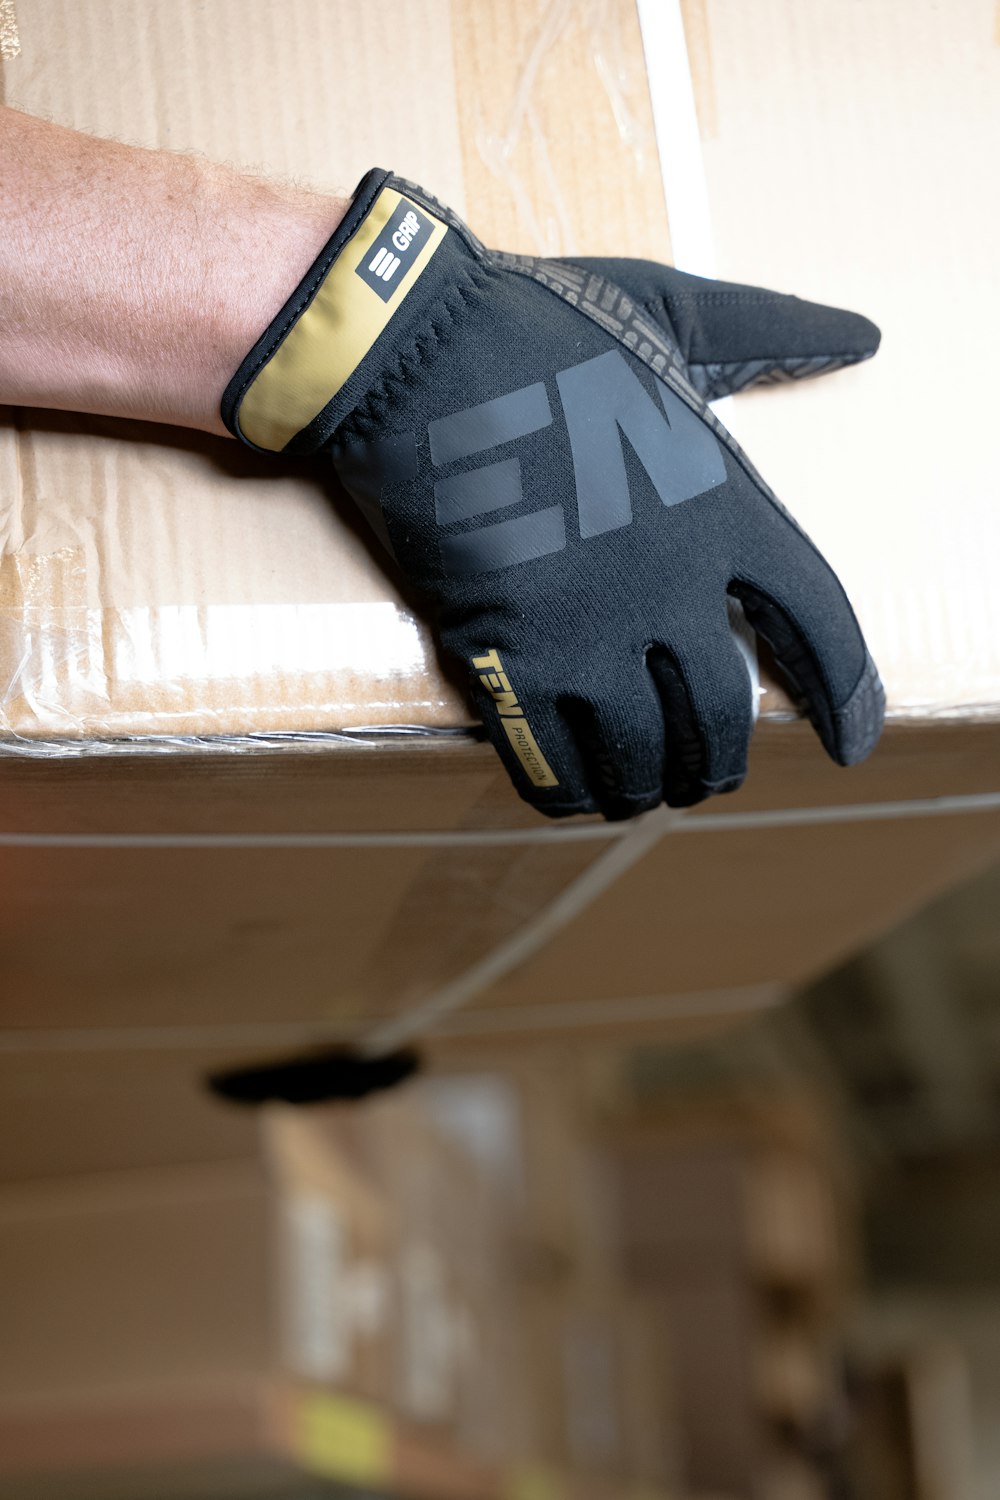 a person's hand wearing a black glove on top of a box